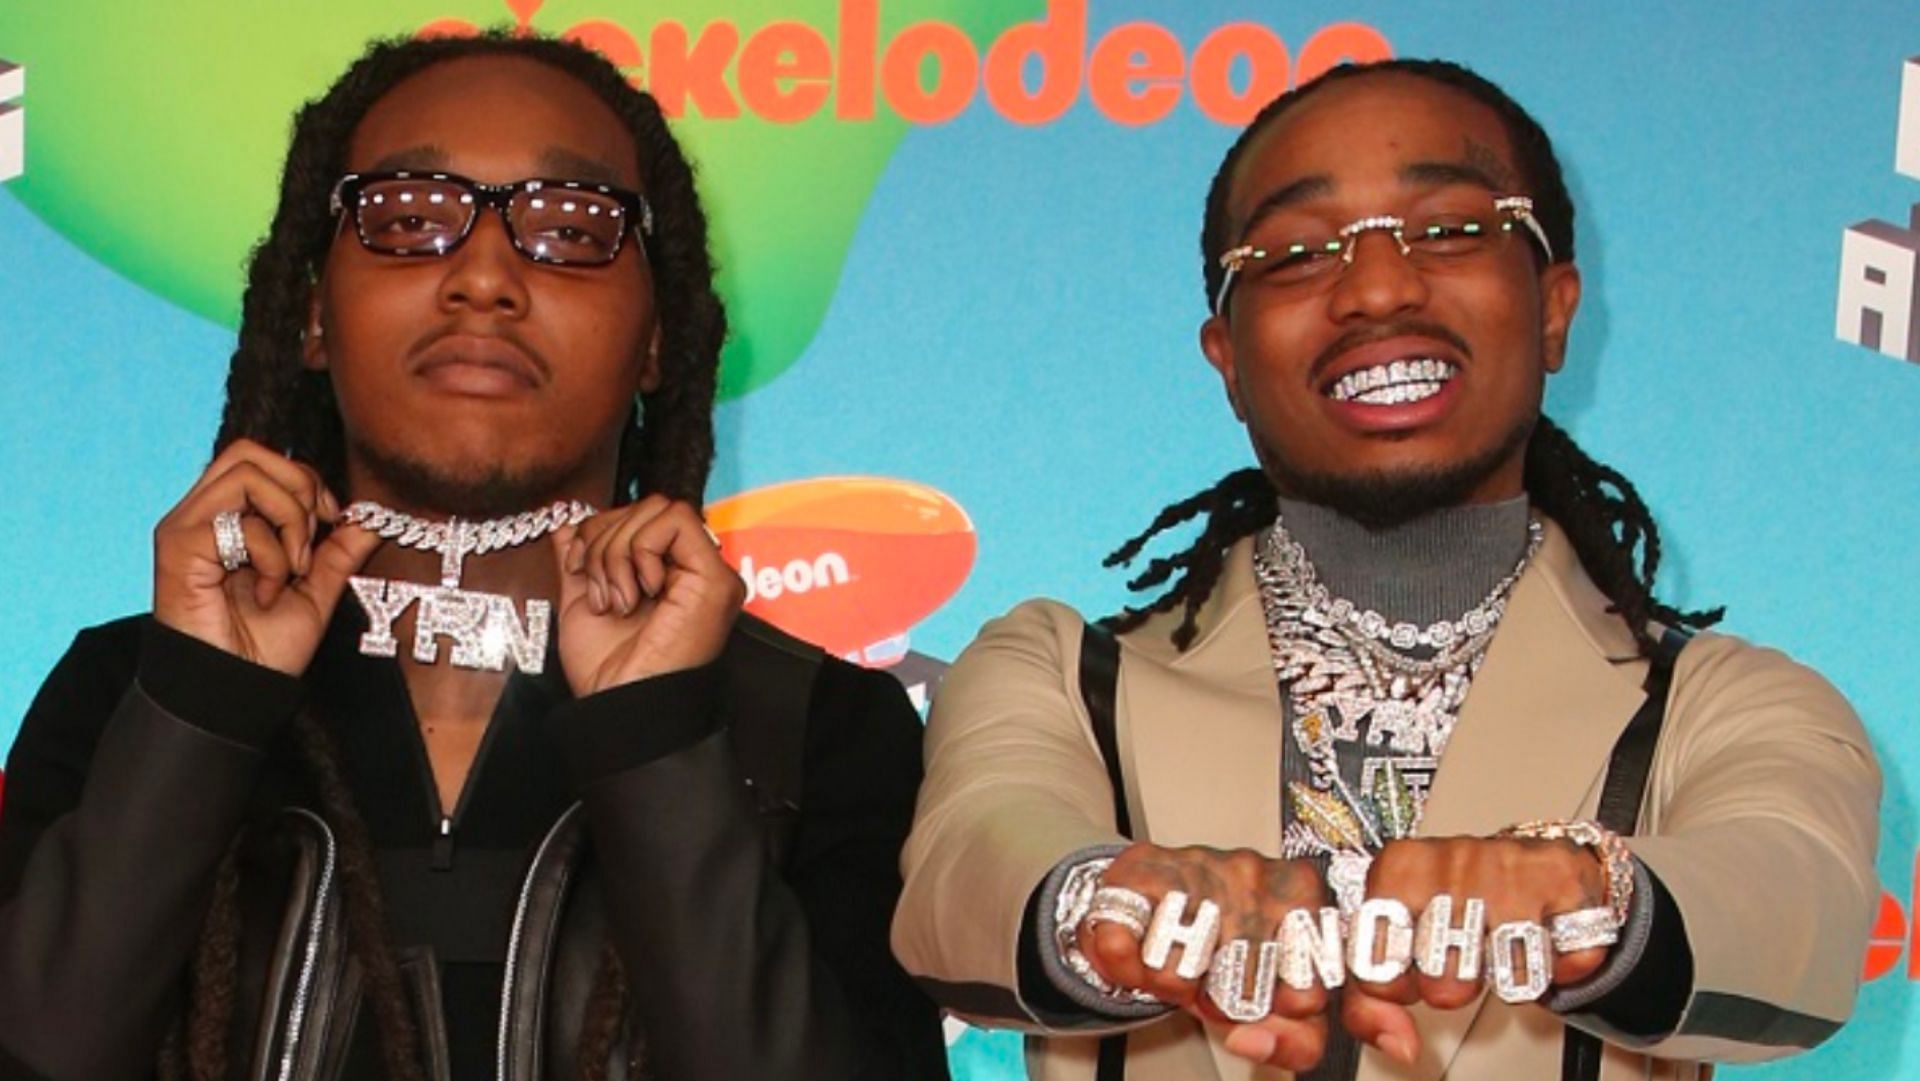 The Pain And Lifelessness In His Face Quavo S New Song Tribute Lyrics To Takeoff Leaves Fans